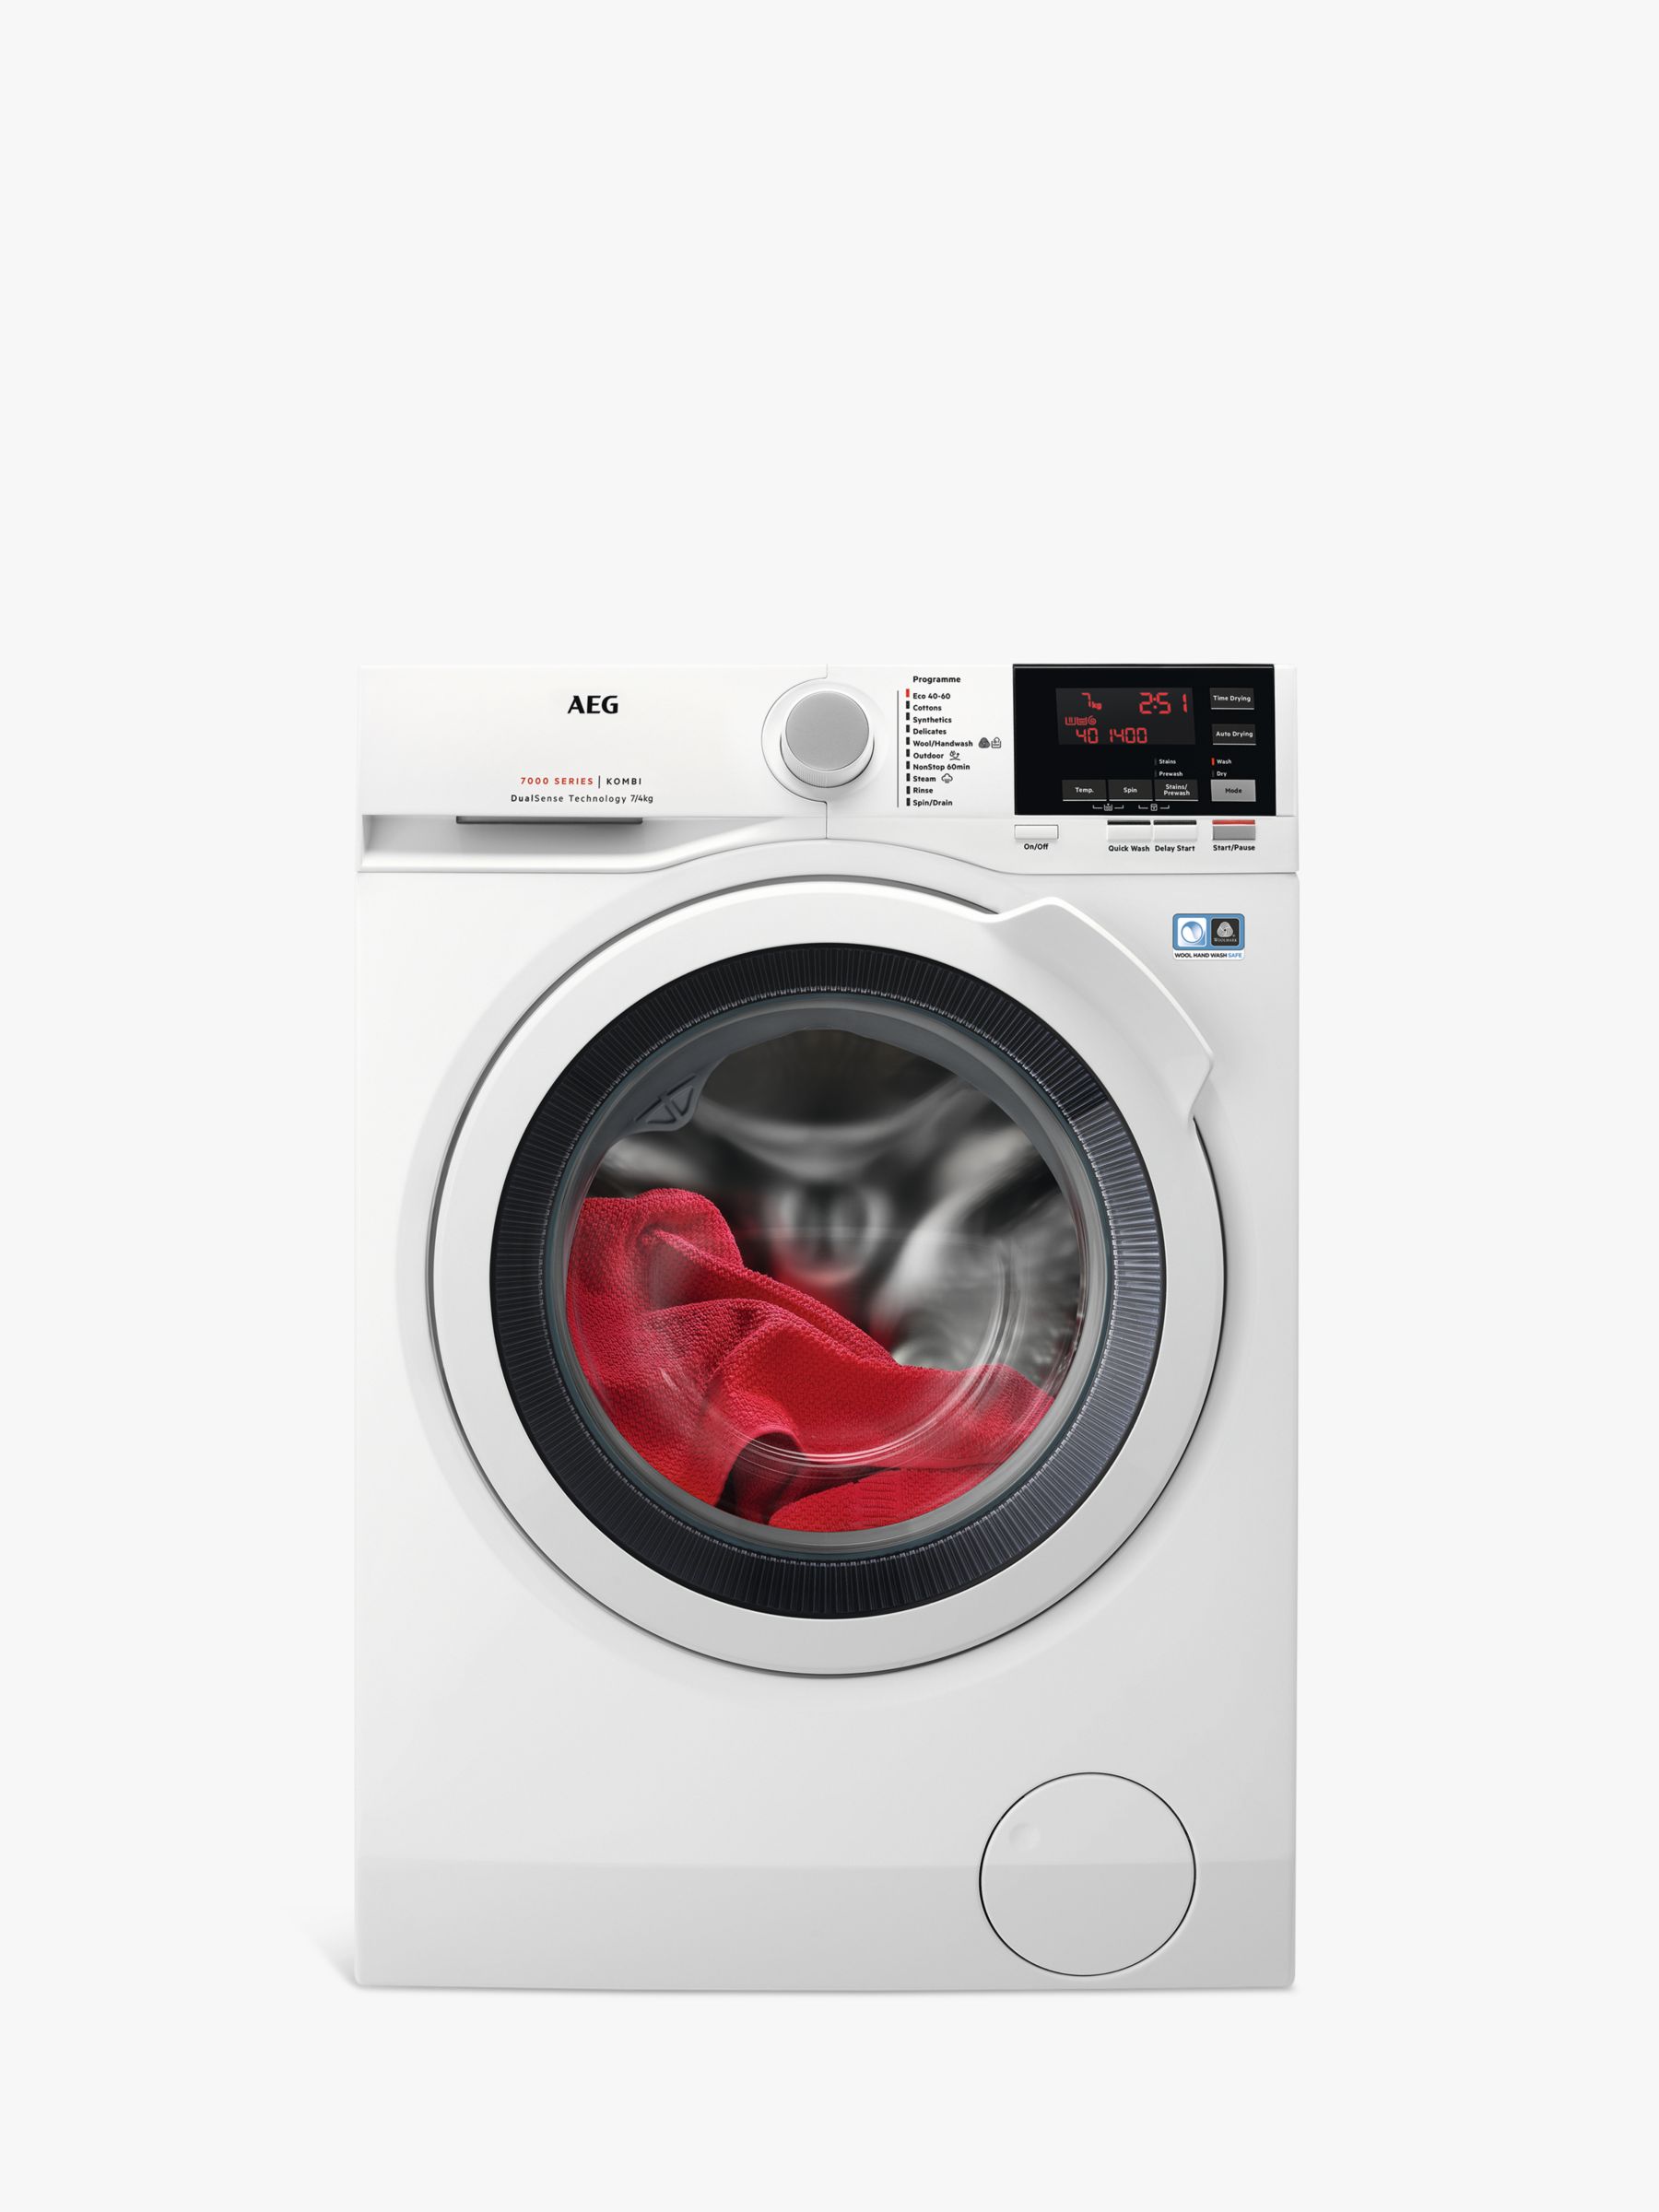 AEG L7WBG741R Freestanding Washer Dryer, 7kg Wash/4kg Dry Load, A Energy Rating, 1400rpm Spin, White